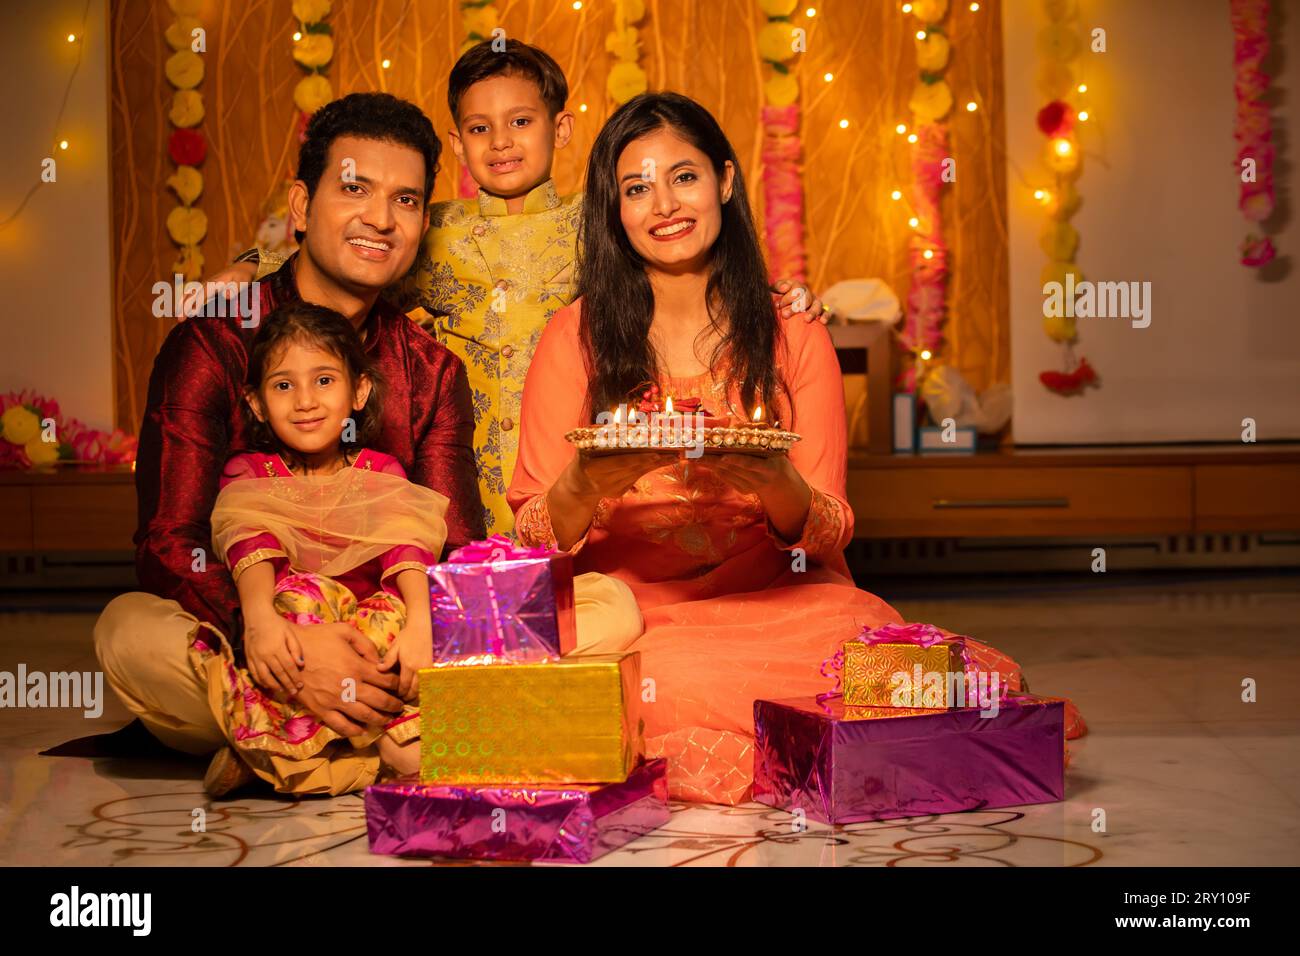 Portrait of happy young Indian family in traditional dress with lots of gifts around sitting on floor celebrating diwali festival at home. Stock Photo